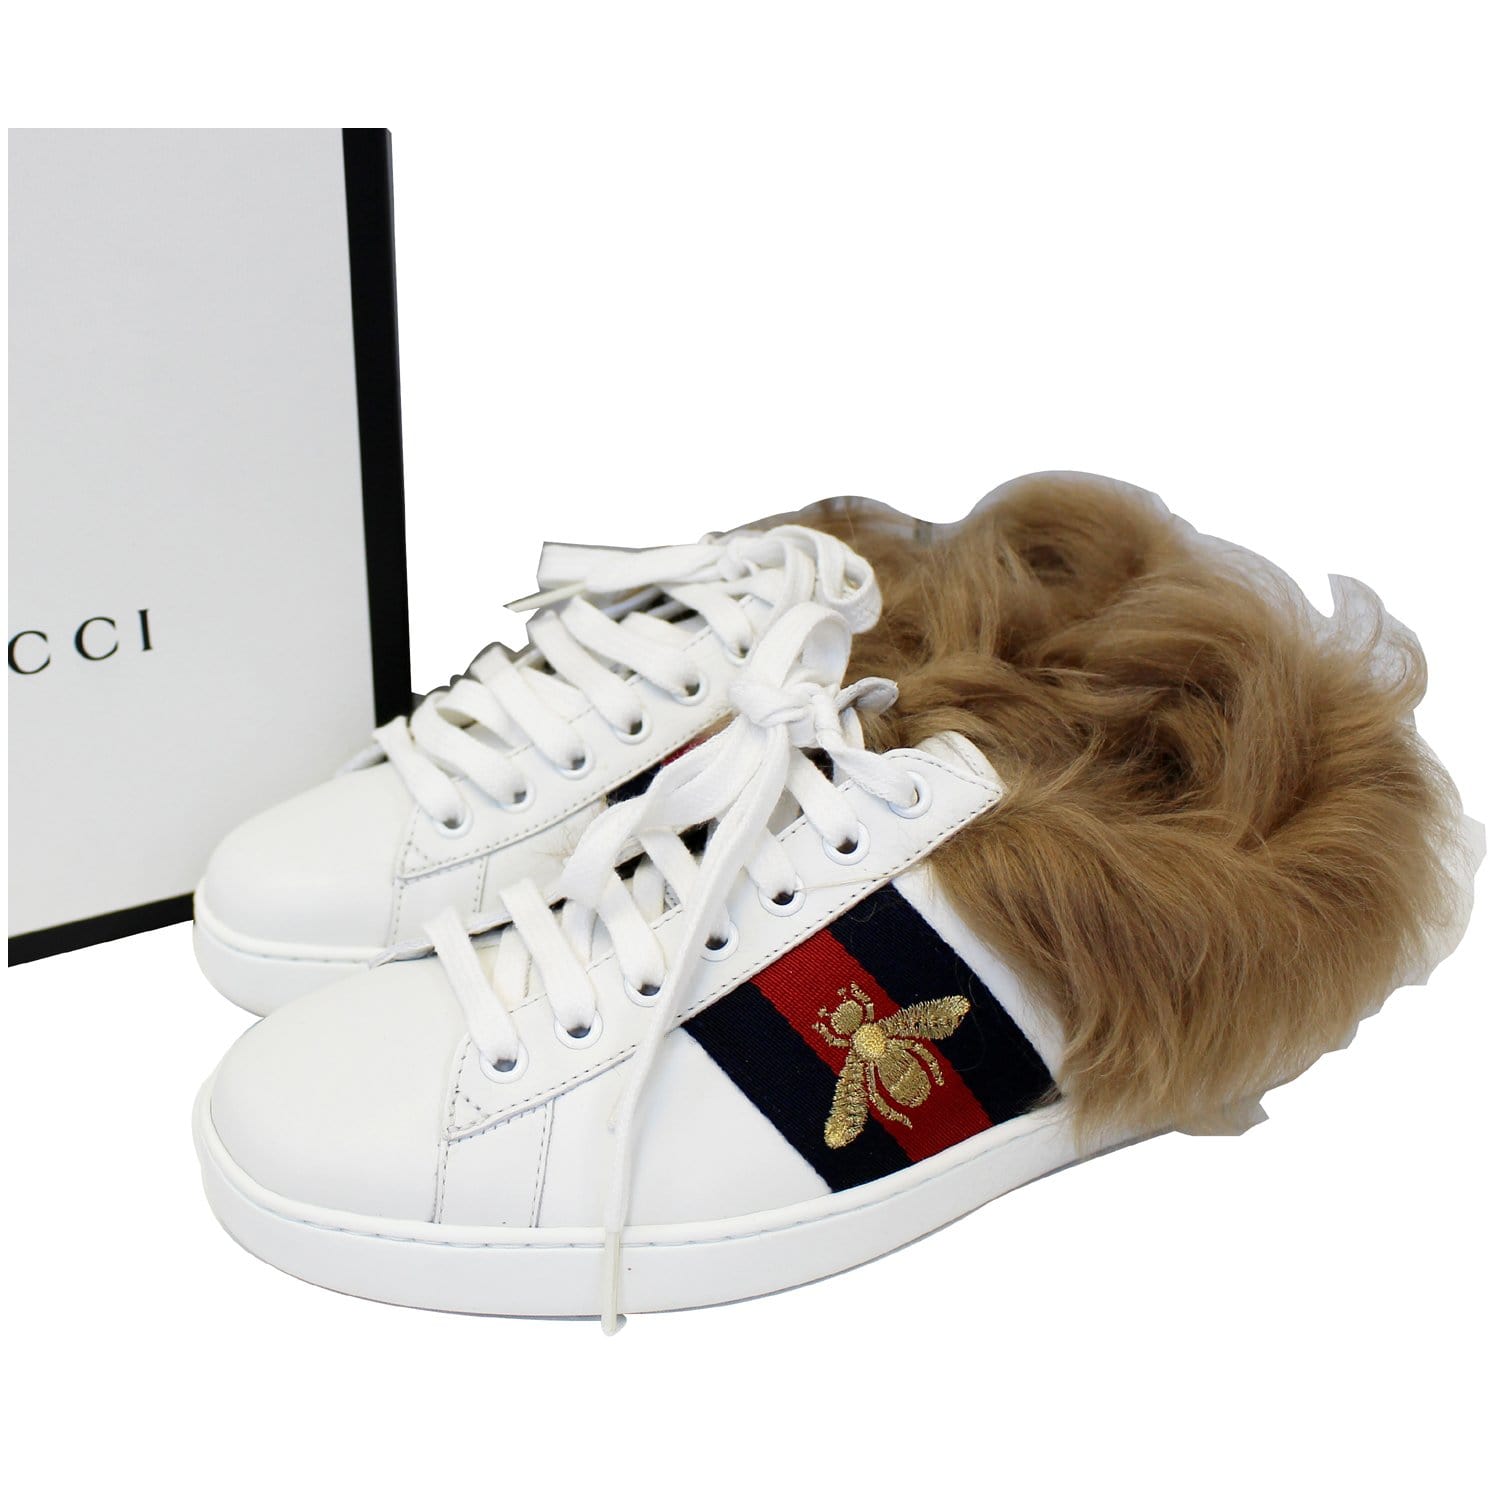 Men's luxury sneakers - Gucci ACE sneakers with fur and gold embroidered  bee